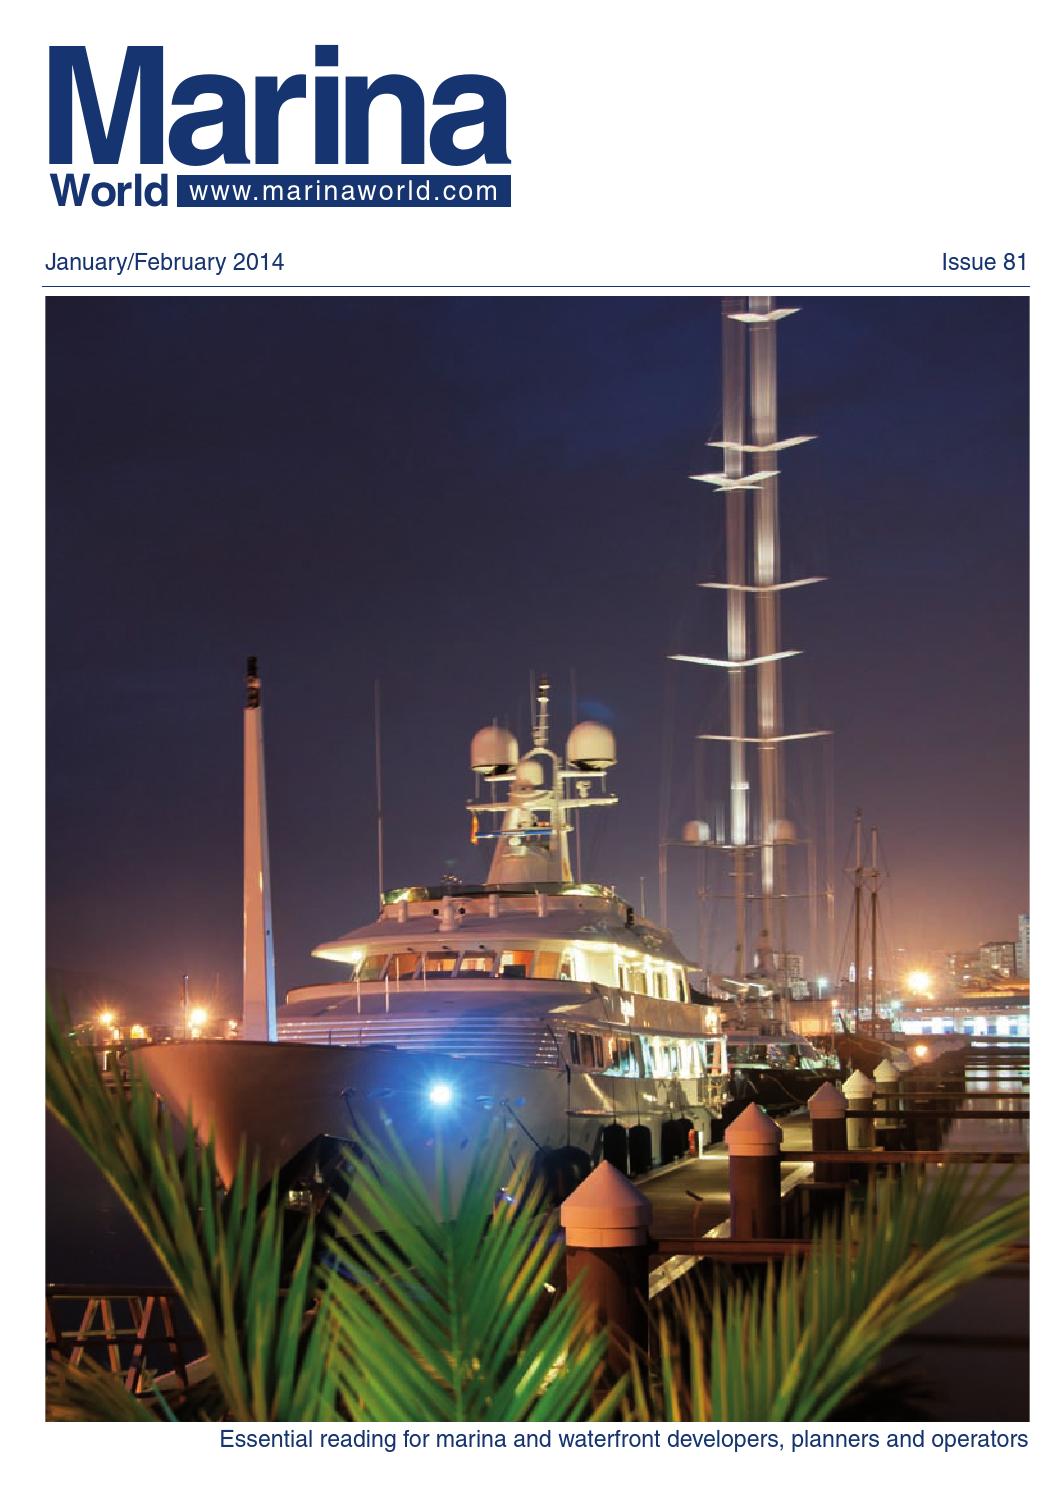 Magasin Canapé Montpellier Élégant 2014 Jan Feb Marina World by Loud & Clear Publishing issuu